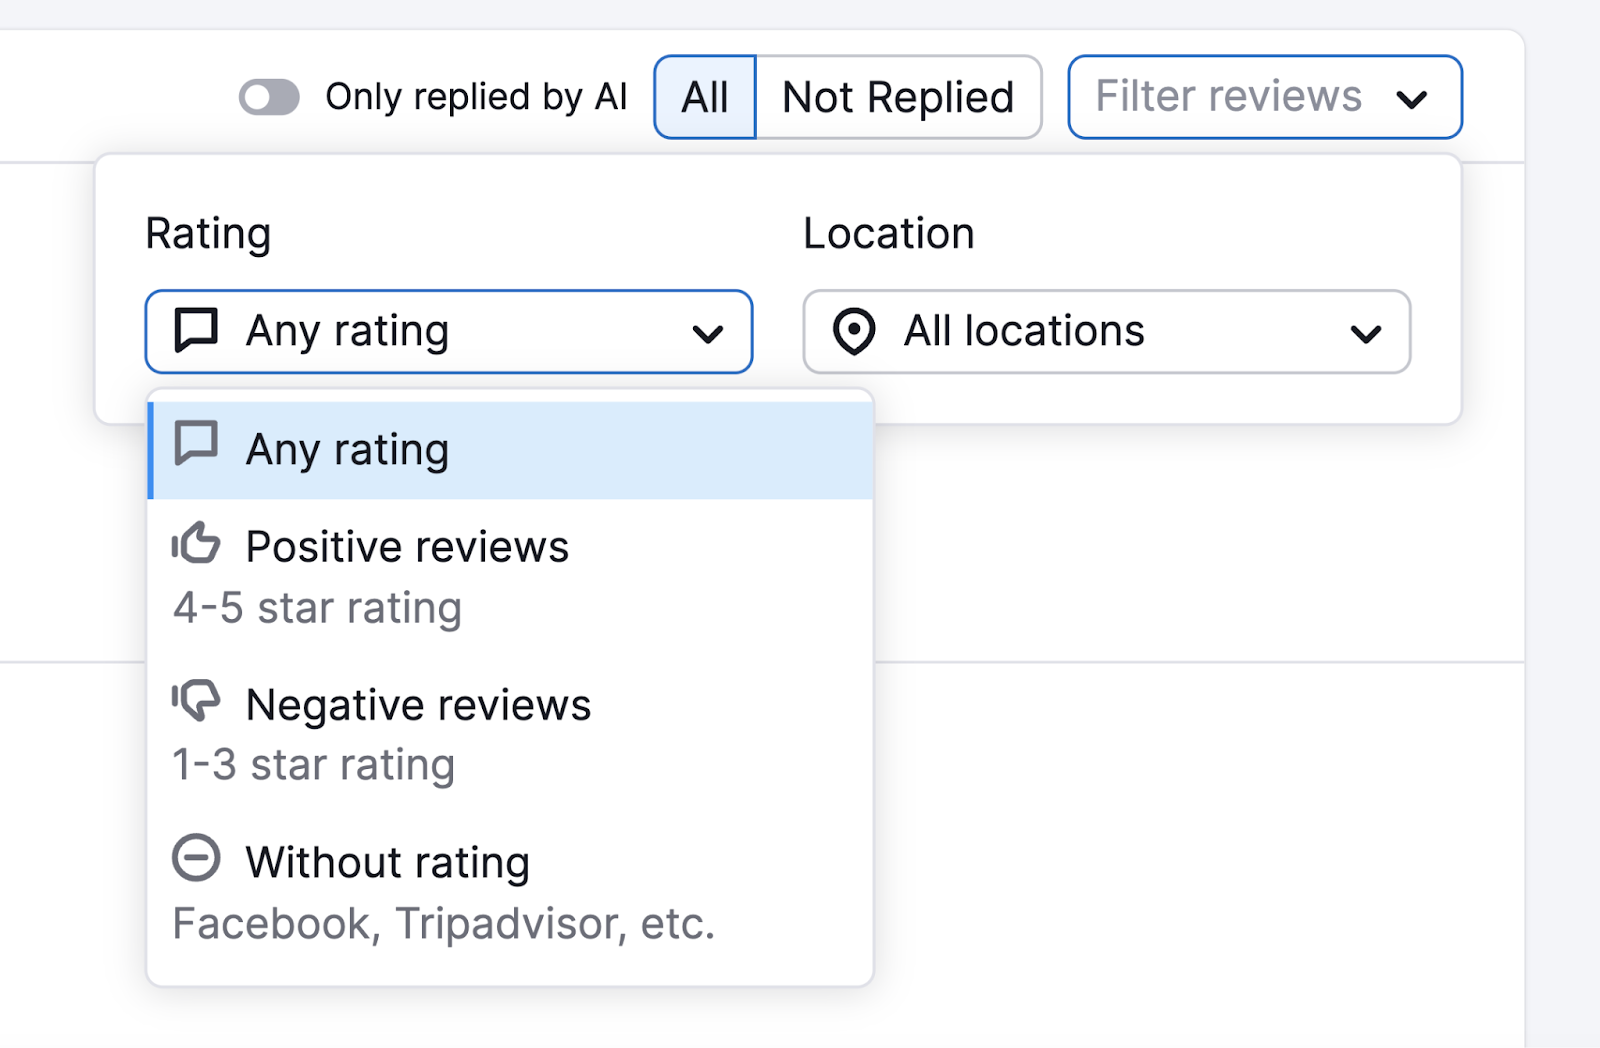 Filtering reviews in Review Management tool